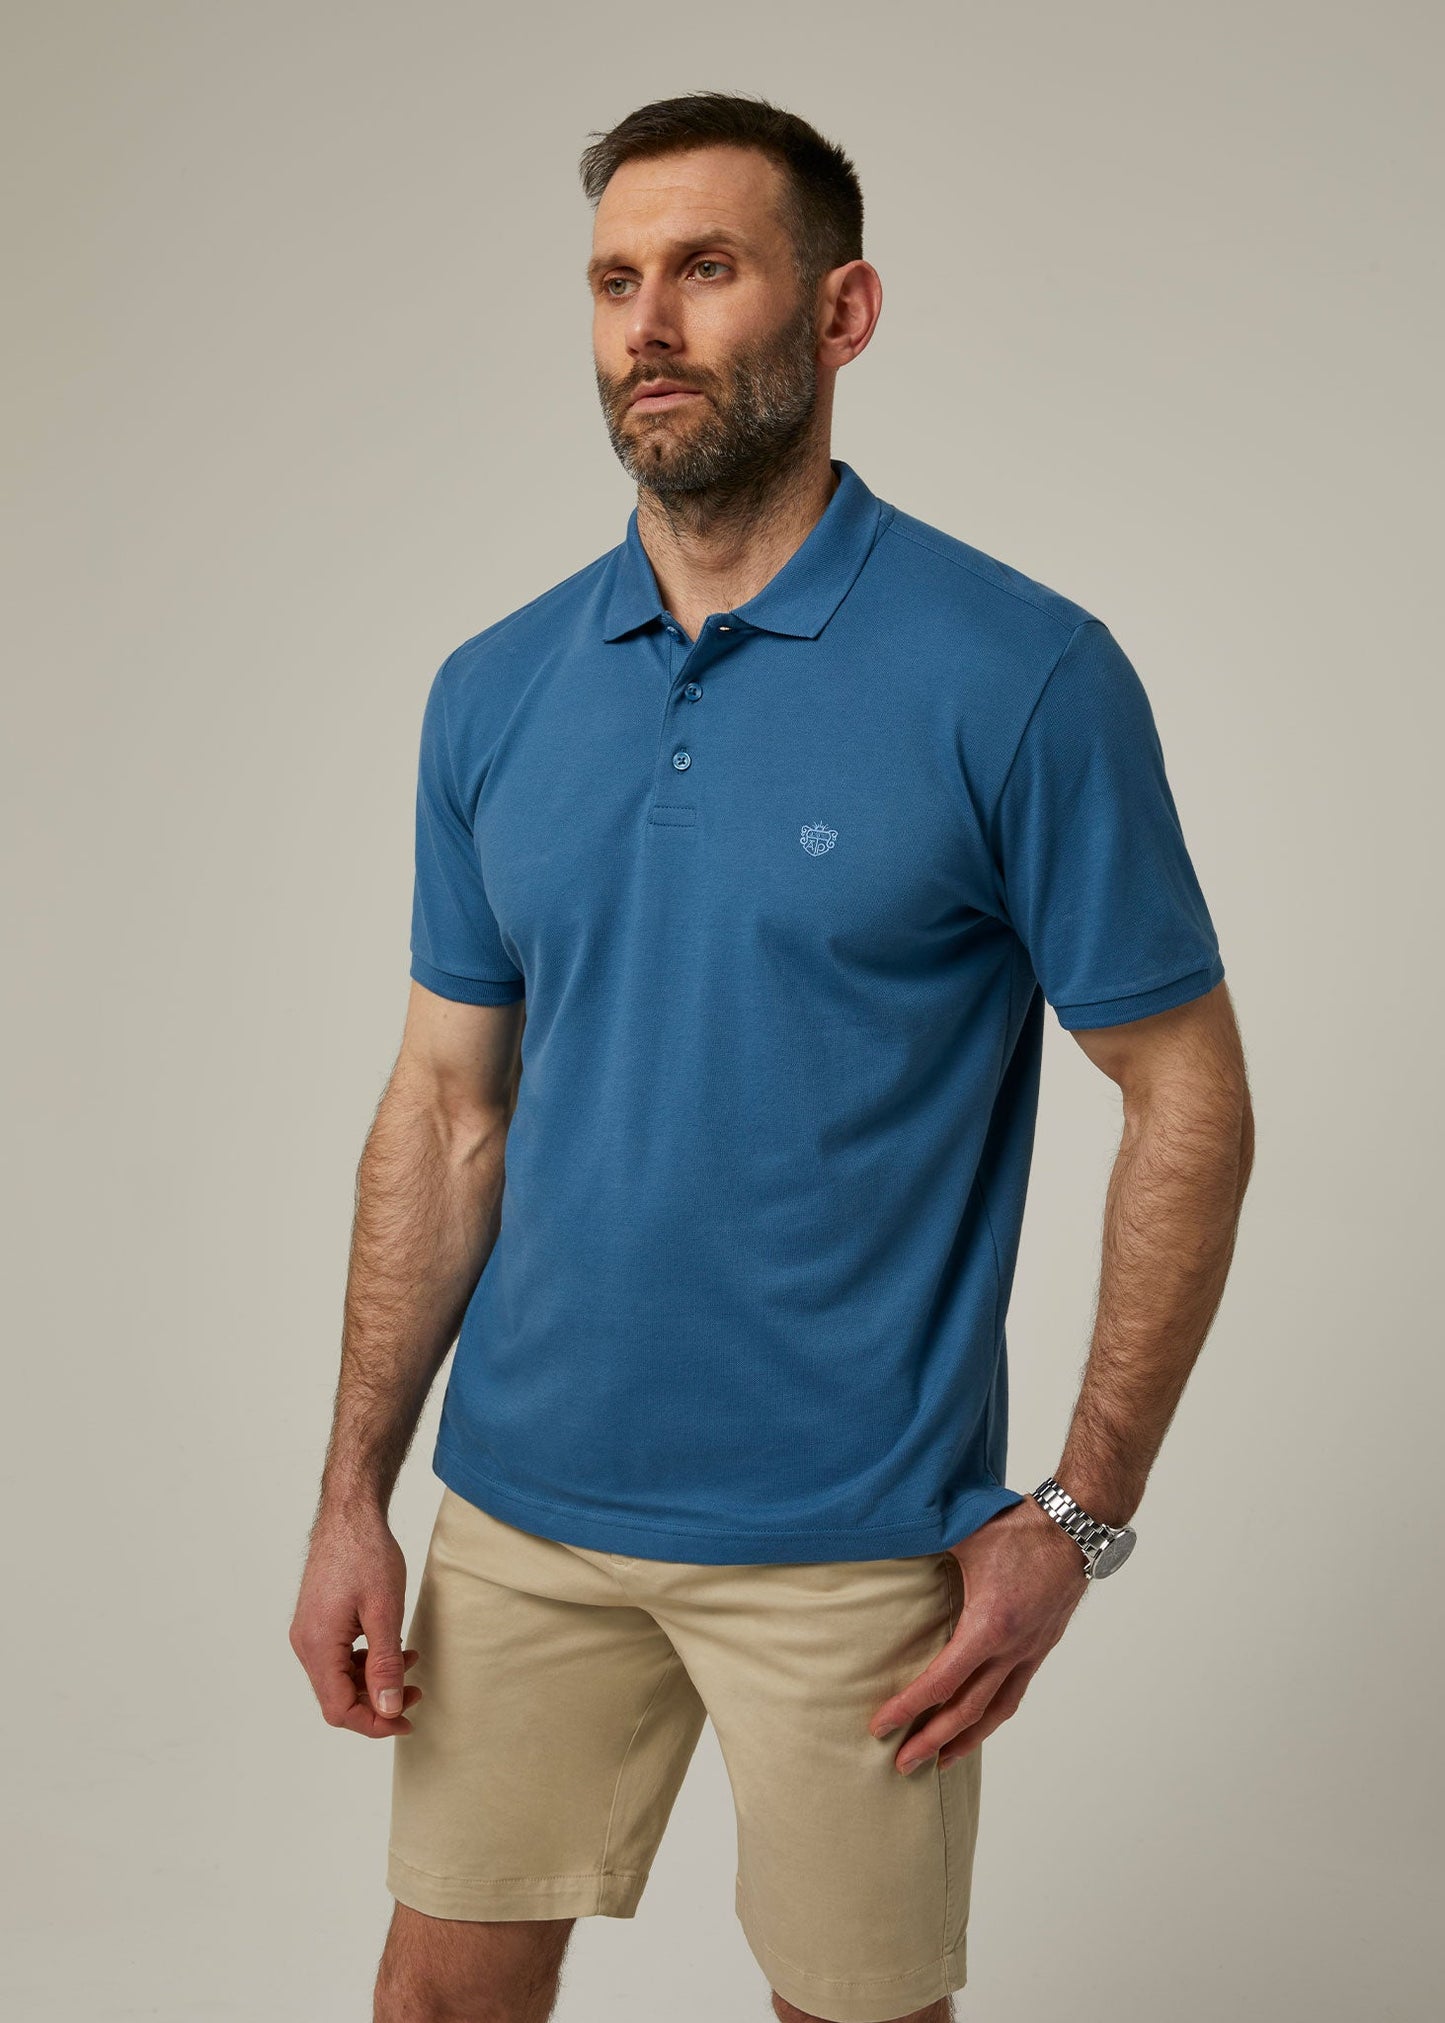 Alan Paine men's short sleeved polo shirt in mid-blue